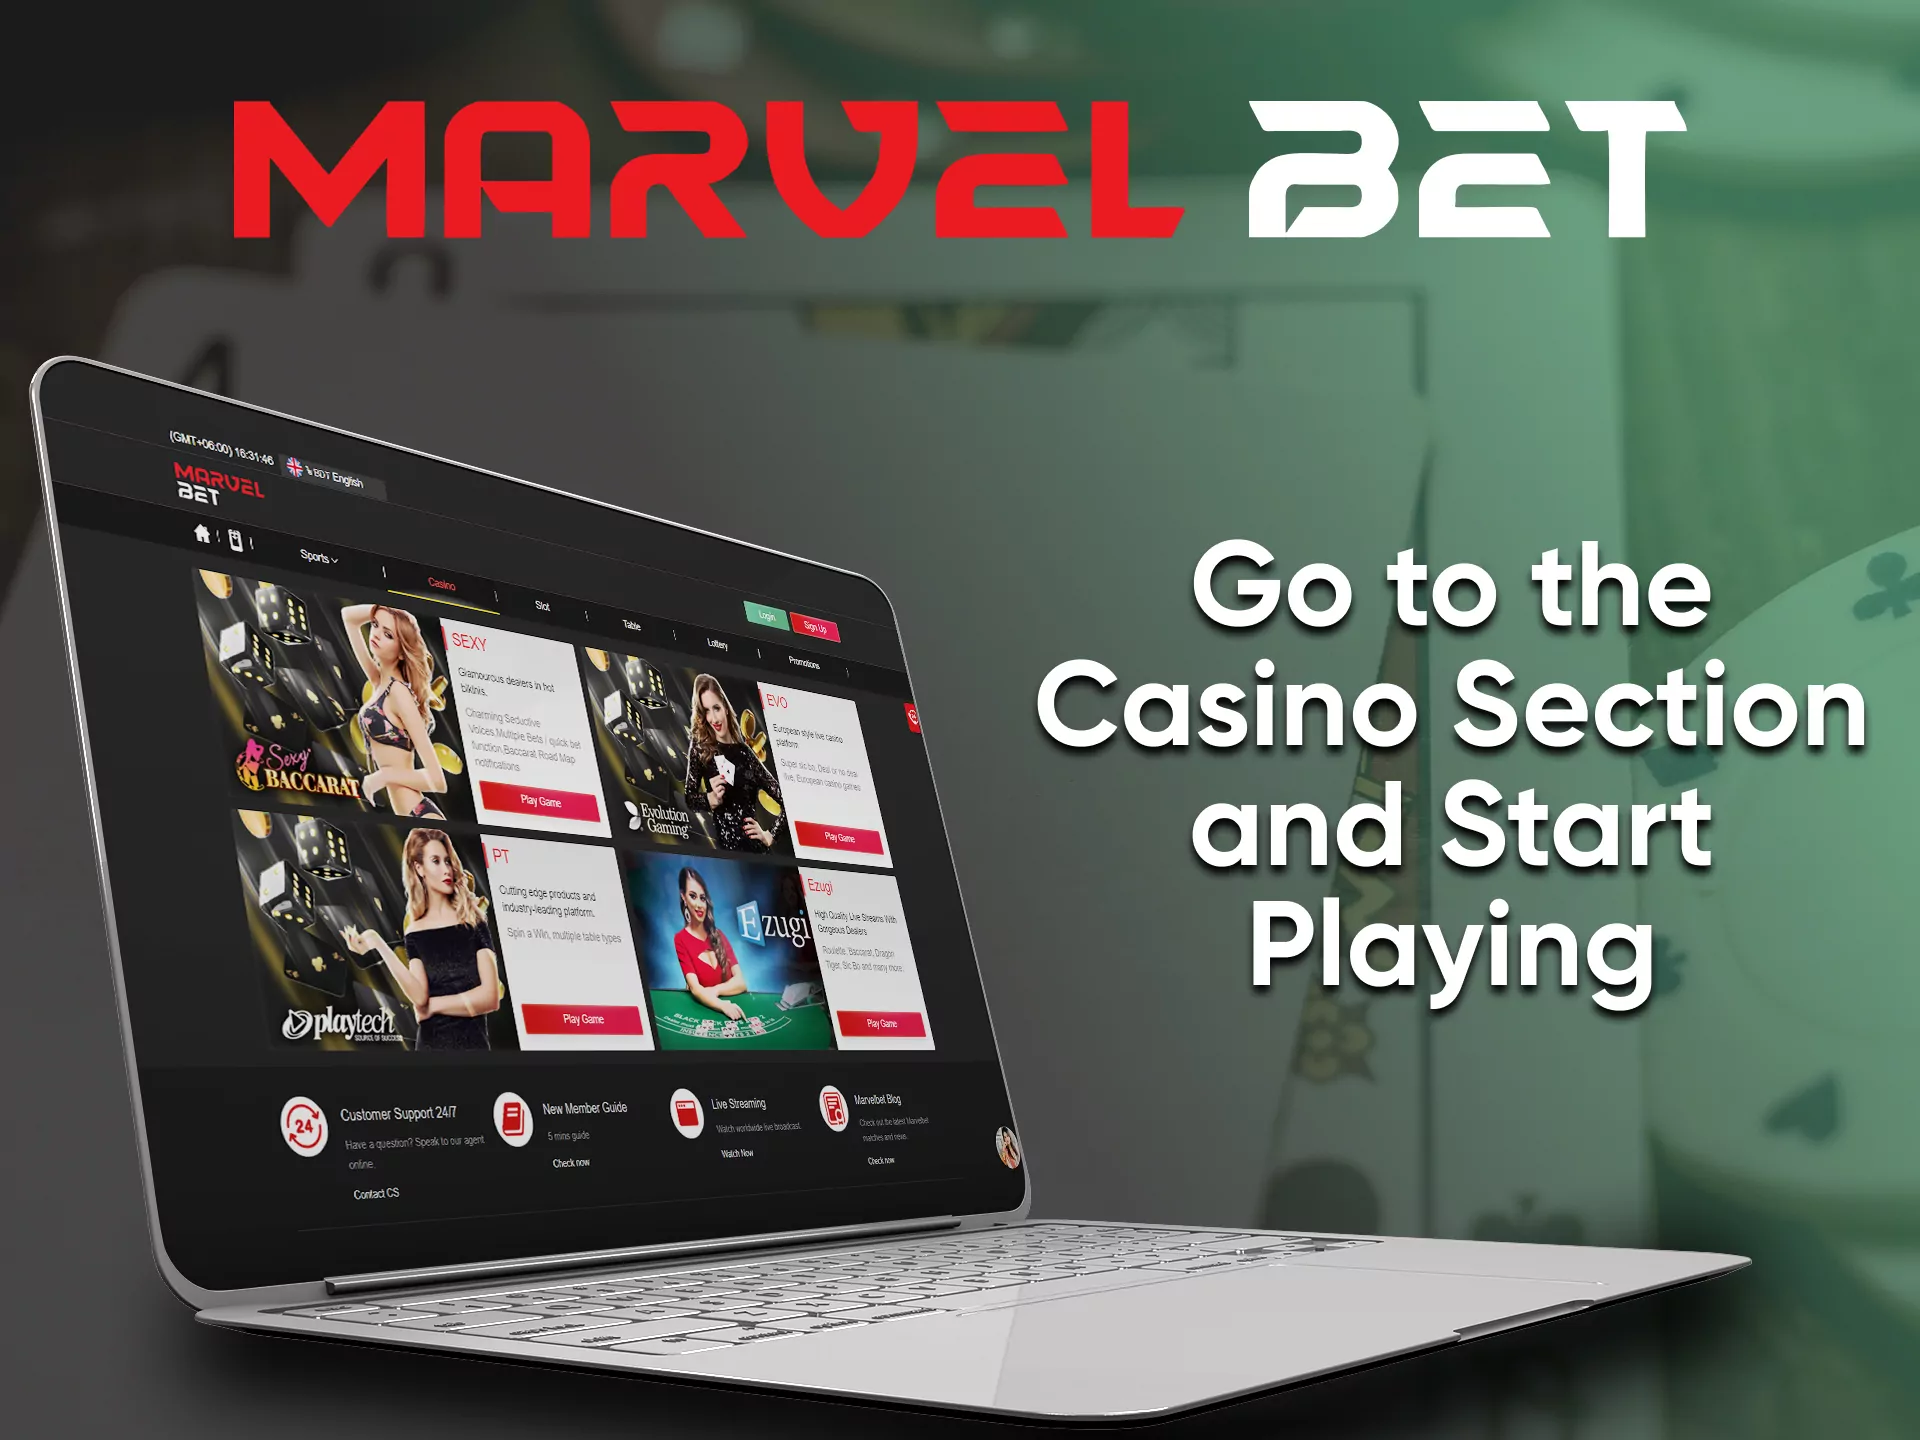 For Marvelbet casino games, go to the desired section.